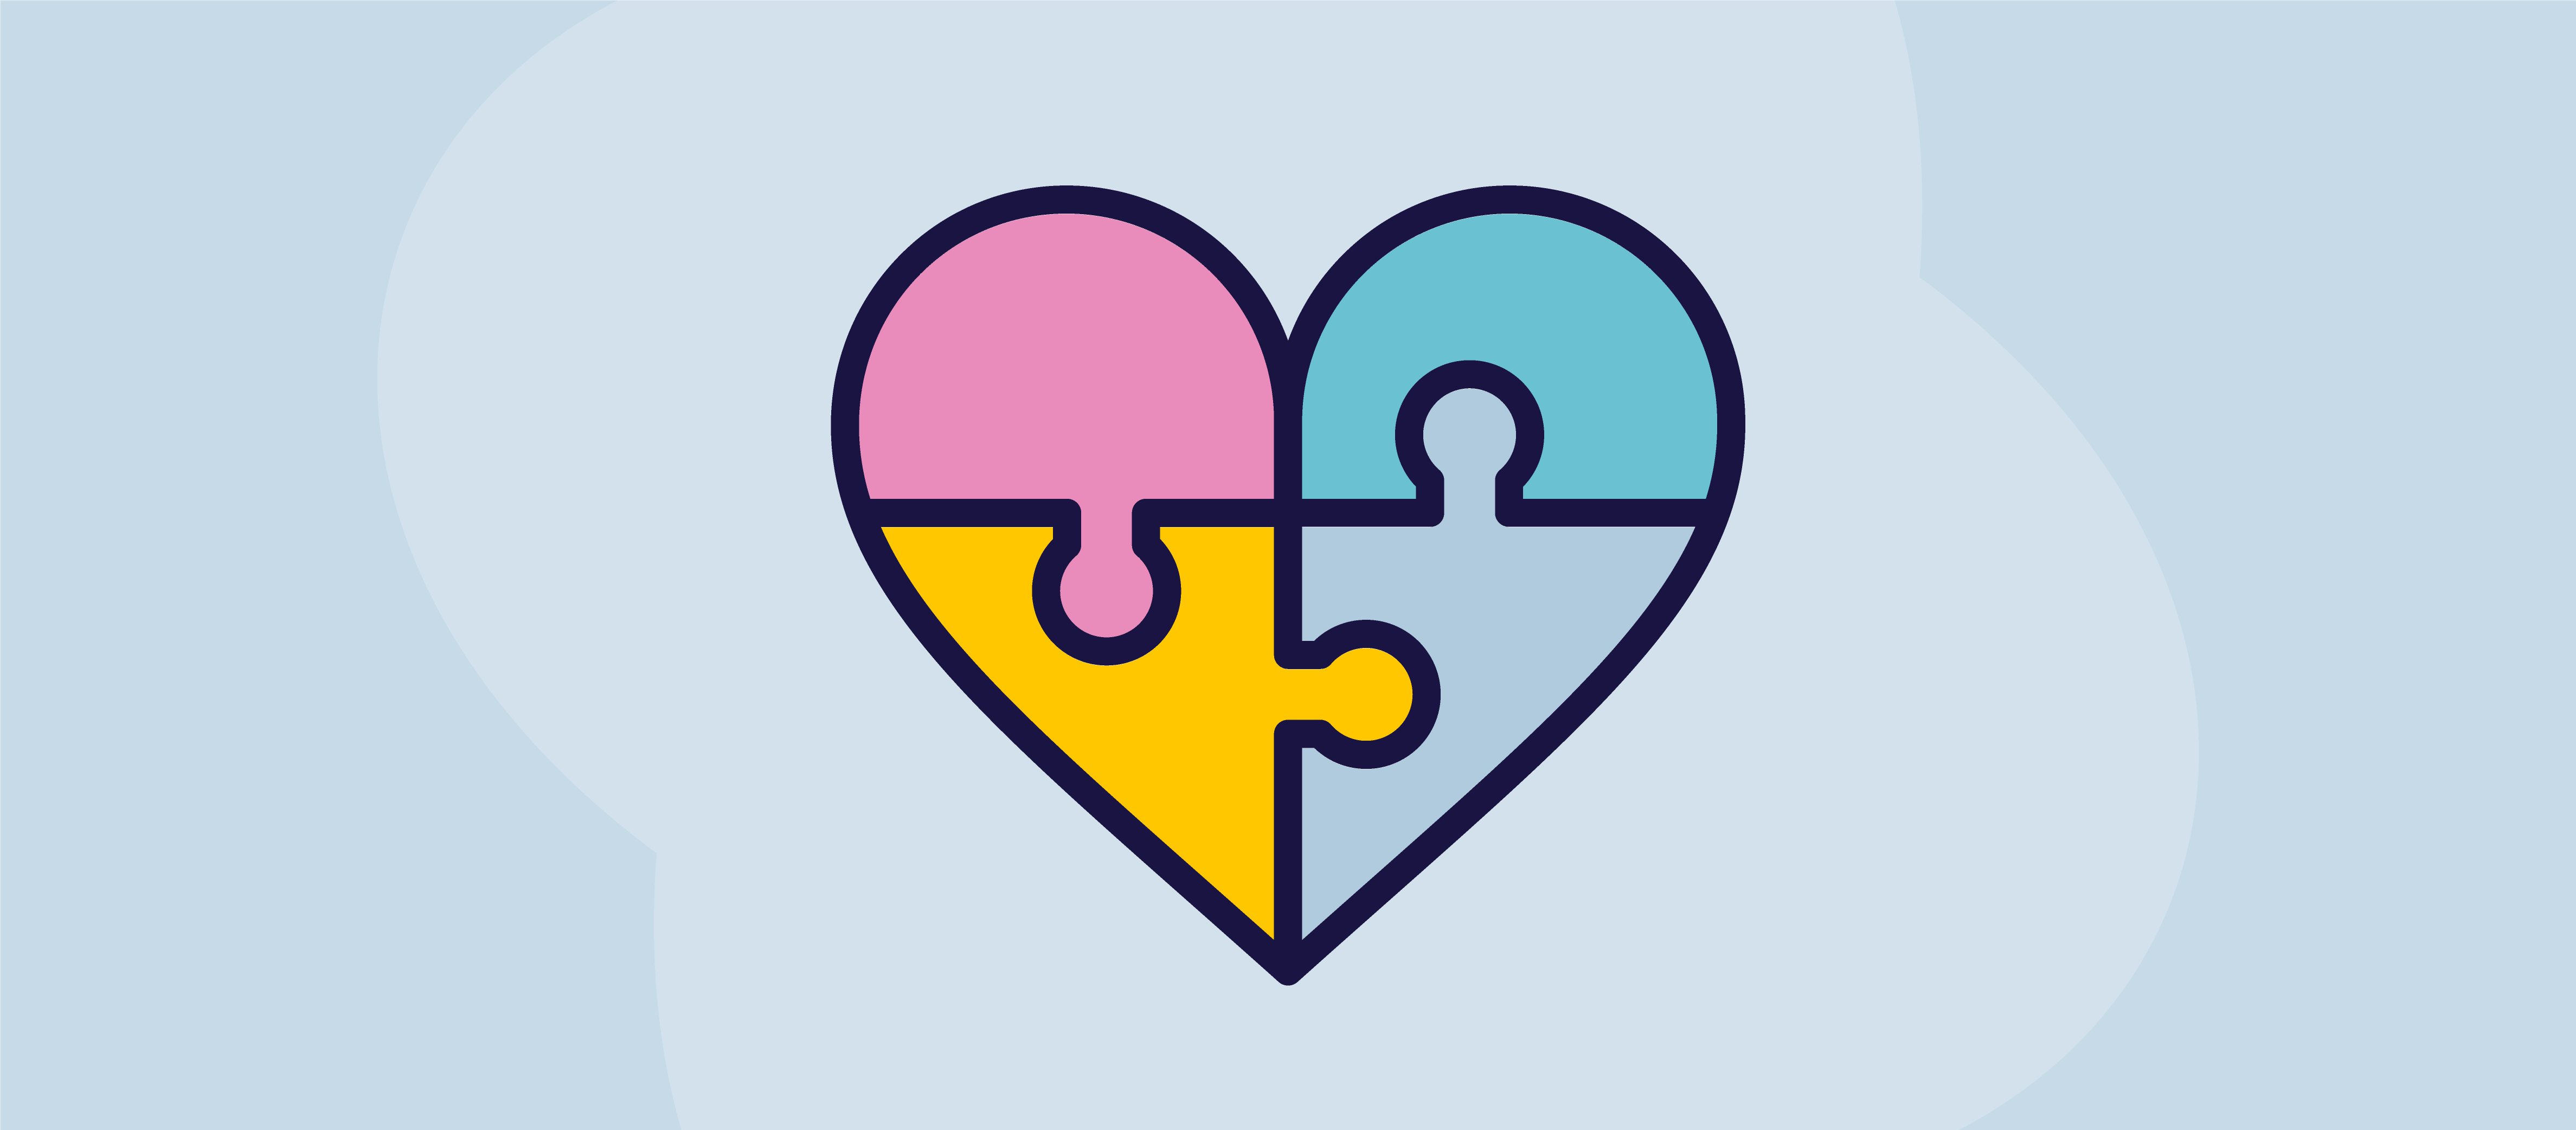 An illustration of a heart as a puzzle with four different coloured pieces coming together to make it complete.